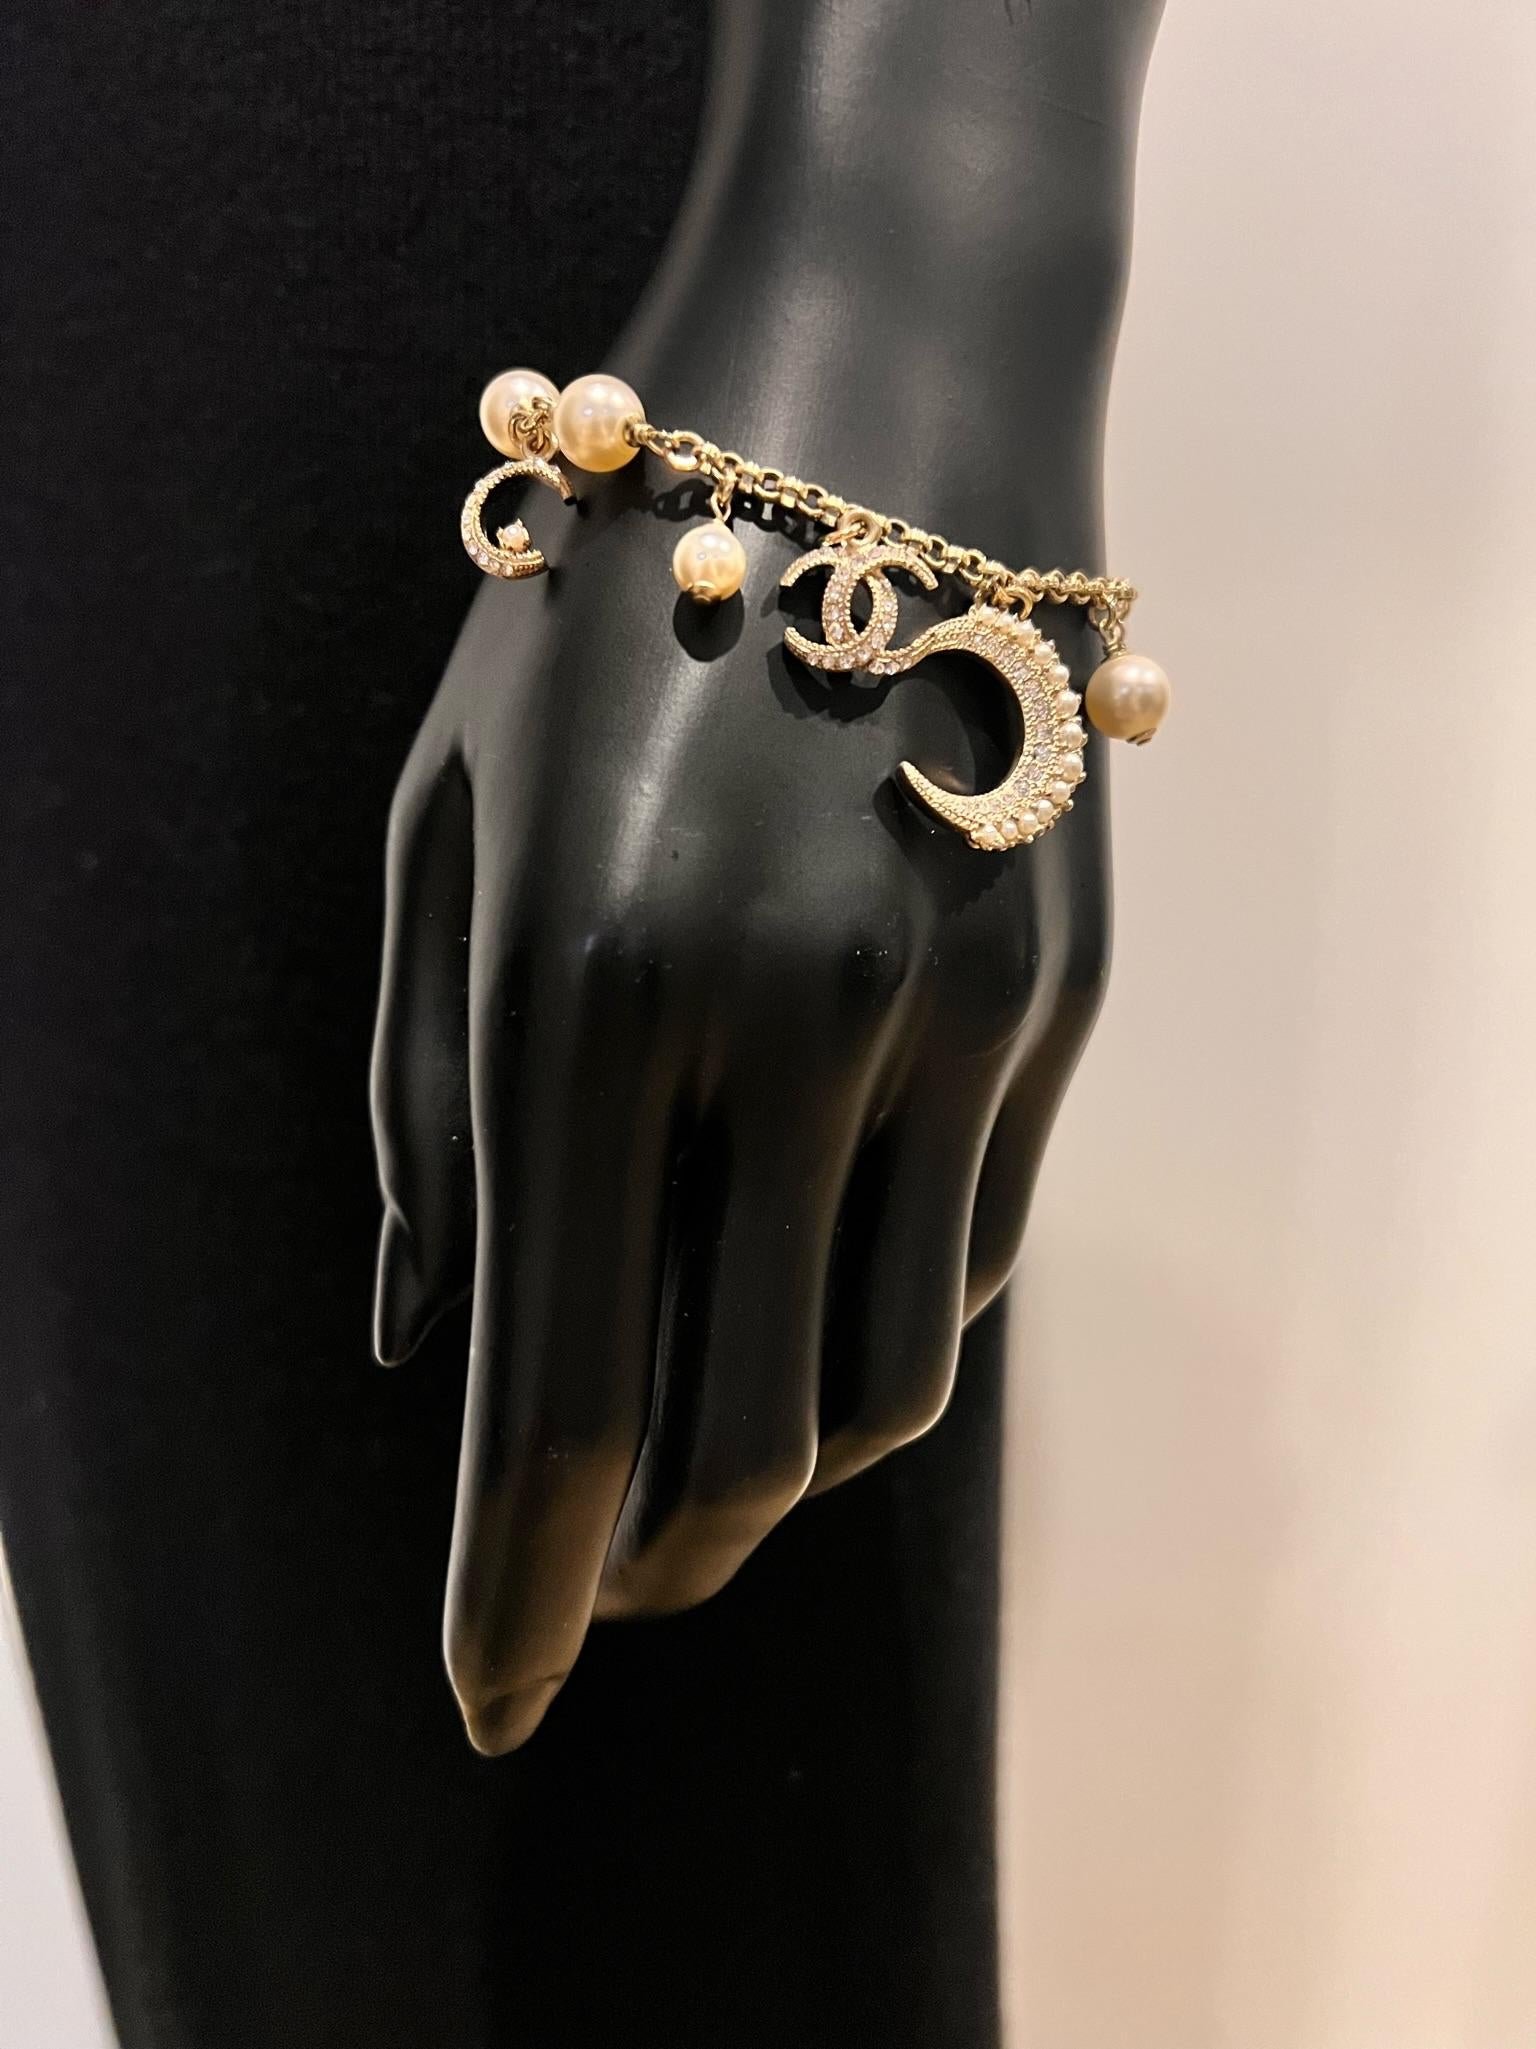 From the Cruise 2015 Collection. Gold-tone Chanel CC Crescent Moon charm bracelet featuring faux pearl stations and lobster clasp closure. Includes jewellery pouch and box. Metal Type: Gold-Tone Metal
Marks: Designer Signature
Metal Finish: High